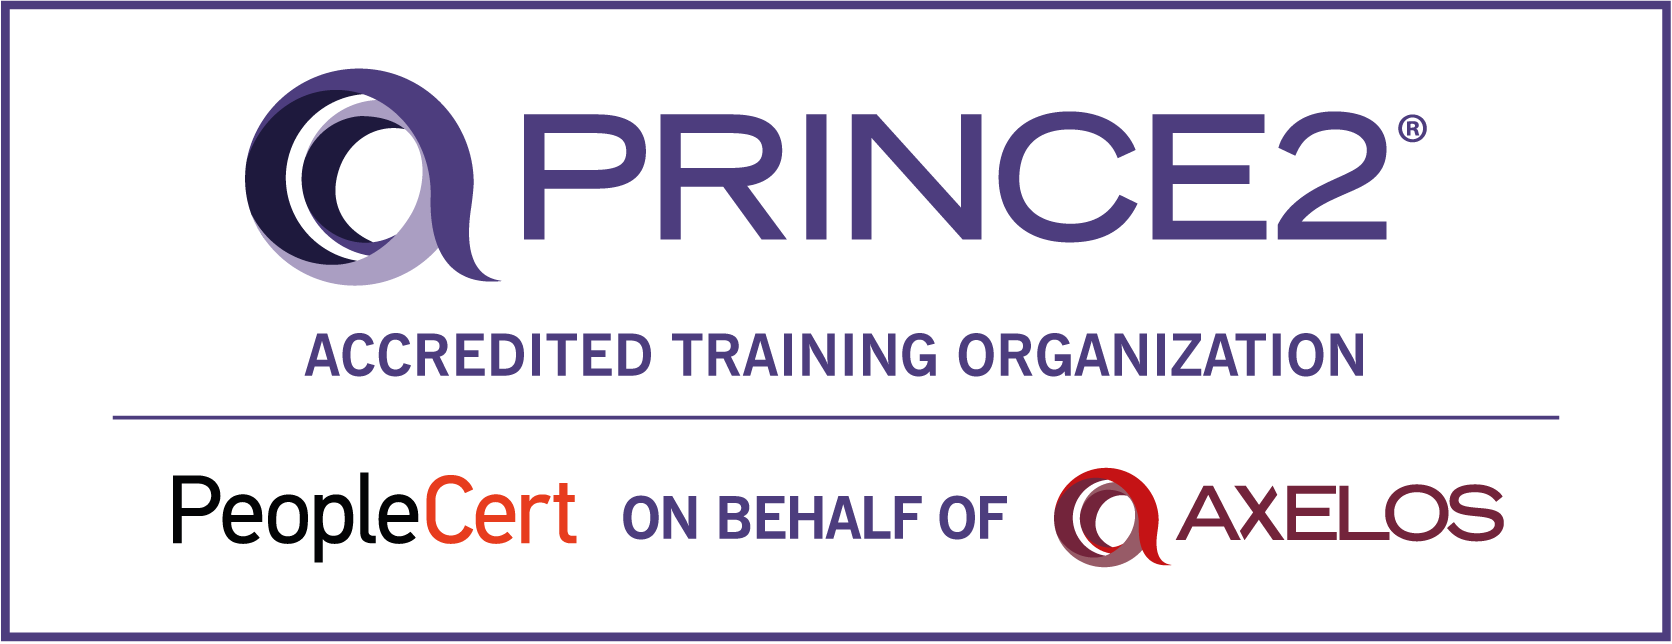 PRINCE2 practitioner training